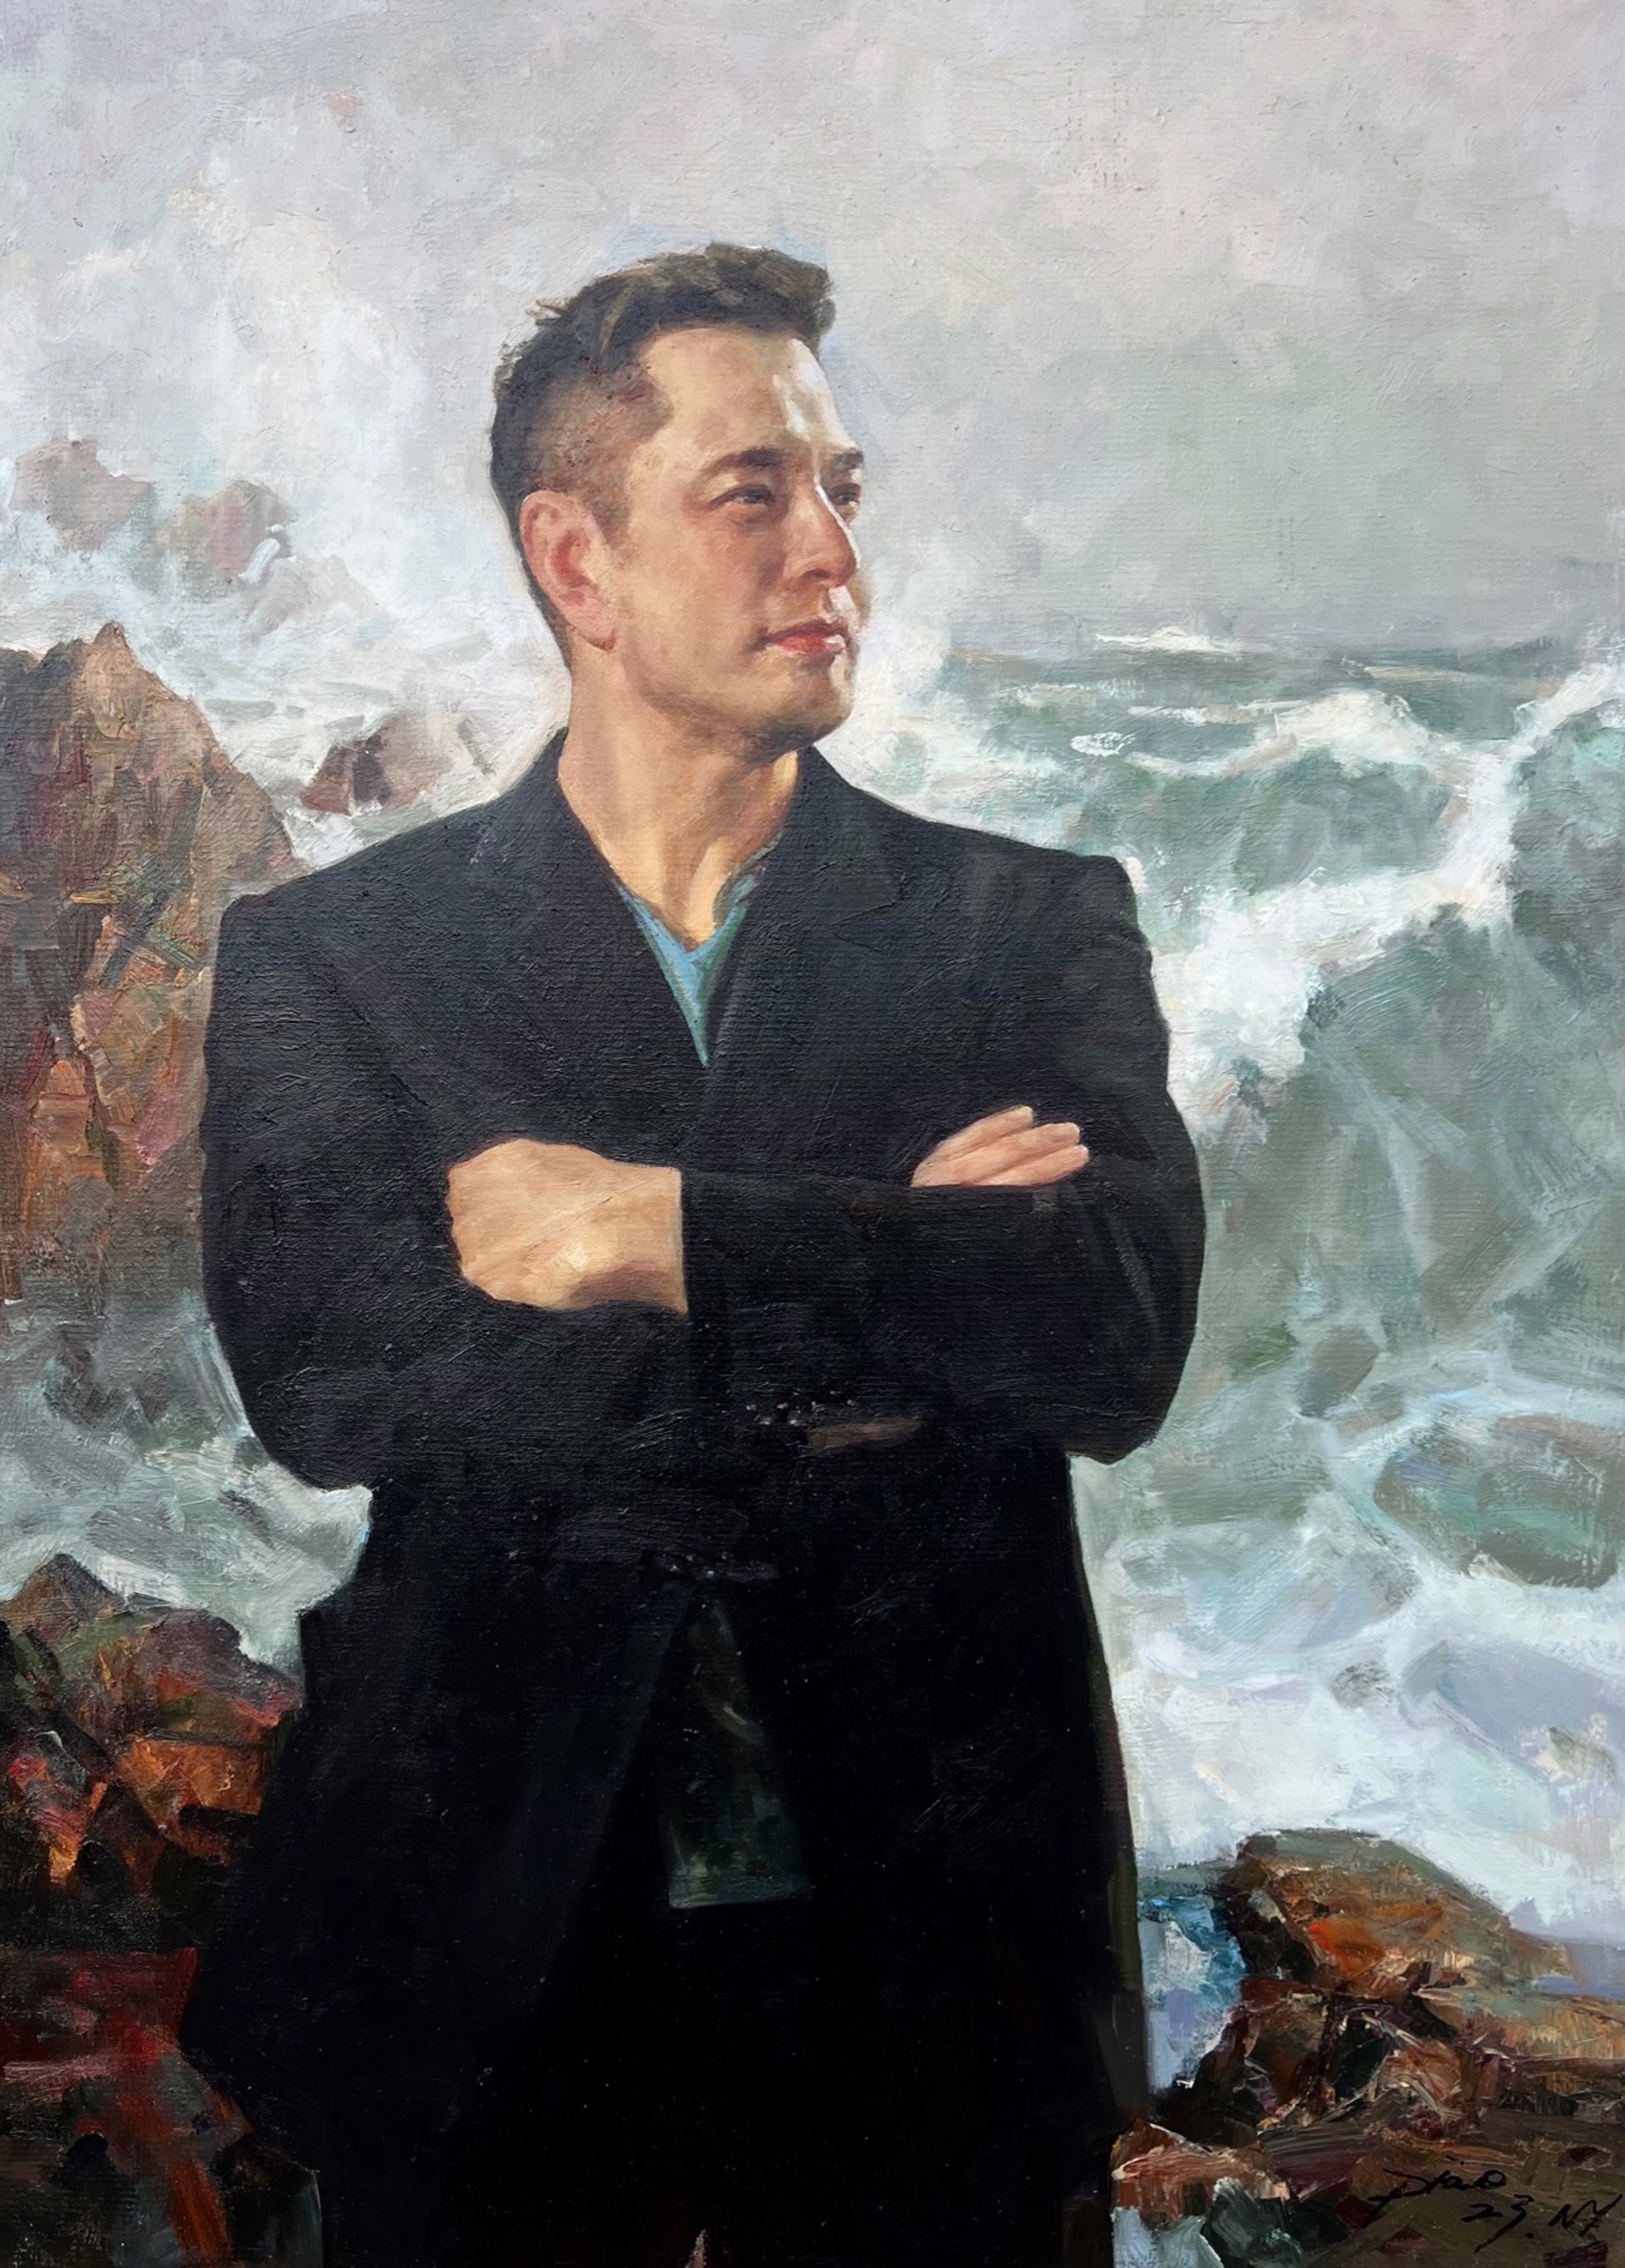 Elon  Musk Riding The Stormy Sea by Piao Xue Cheng